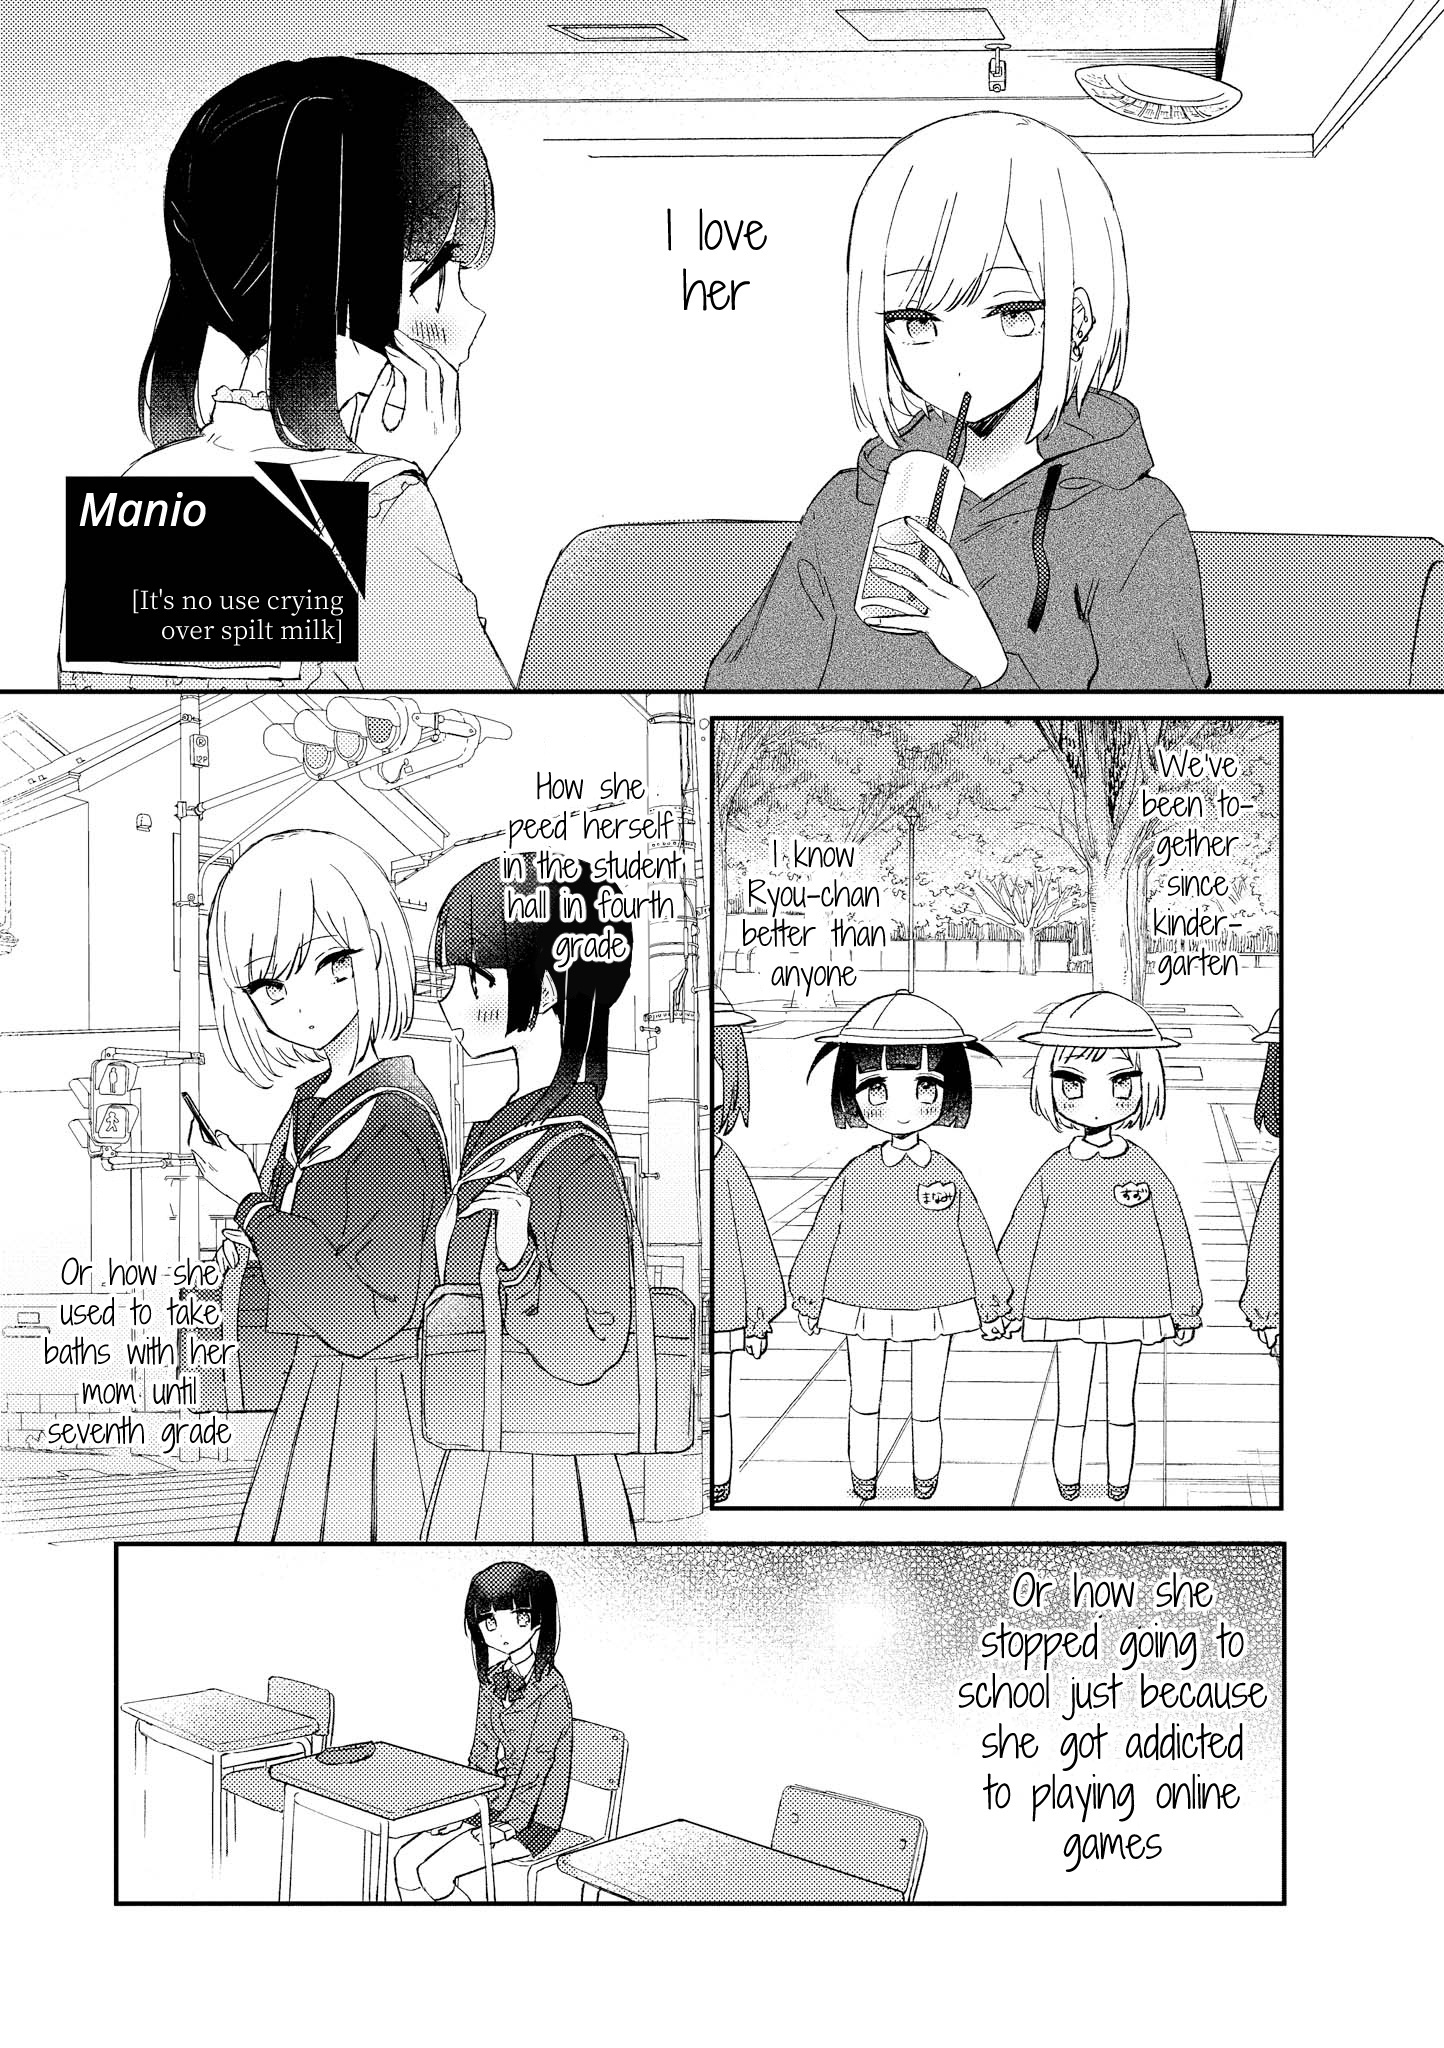 Love And Hate And Love (Unrequited Love Yuri Anthology) Chapter 2: Manio - It's No Use Crying Over Spilt Milk - Picture 1